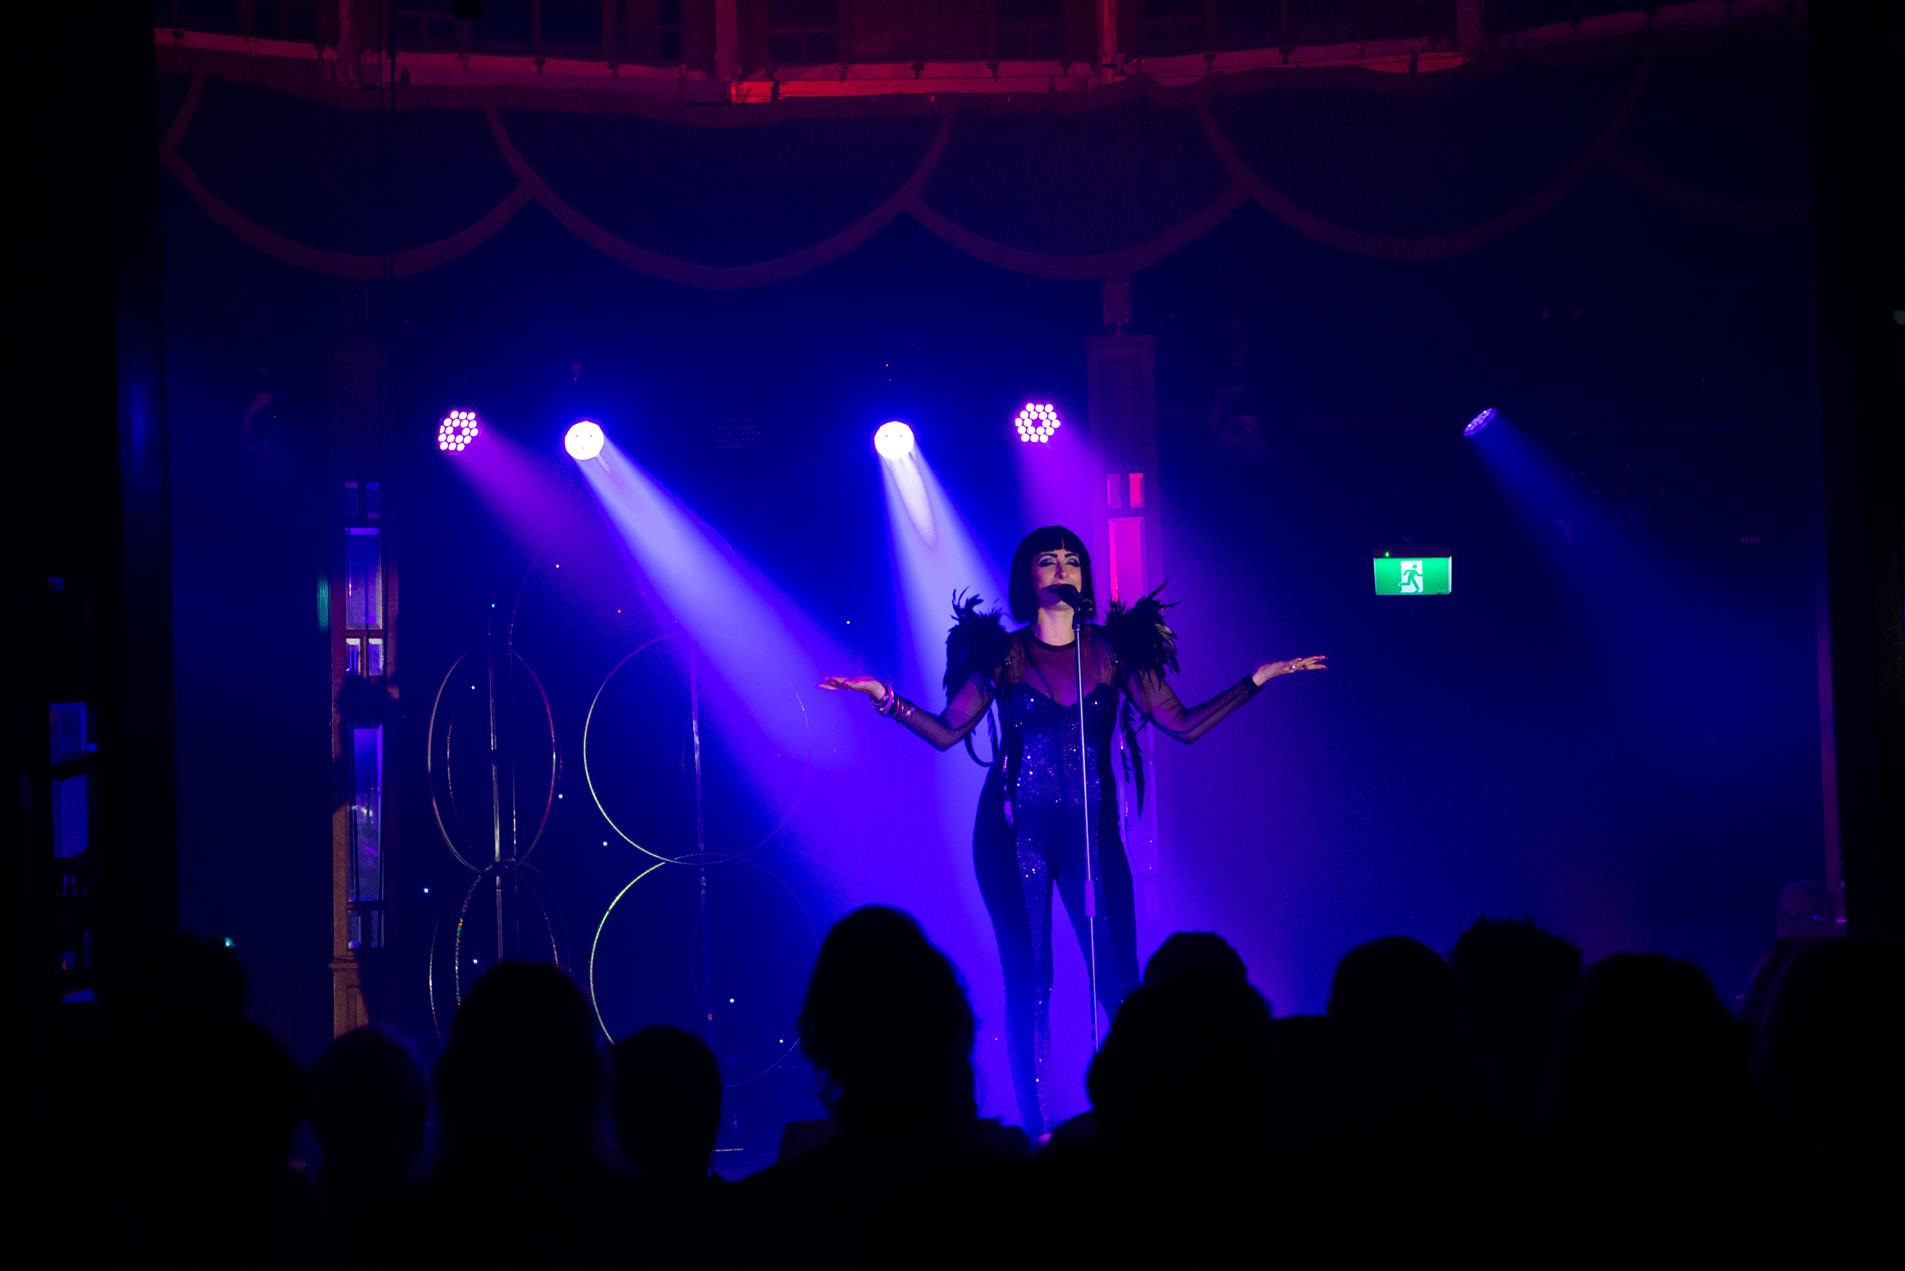 Performer in a black body suit with outstretched arms singing on stage.